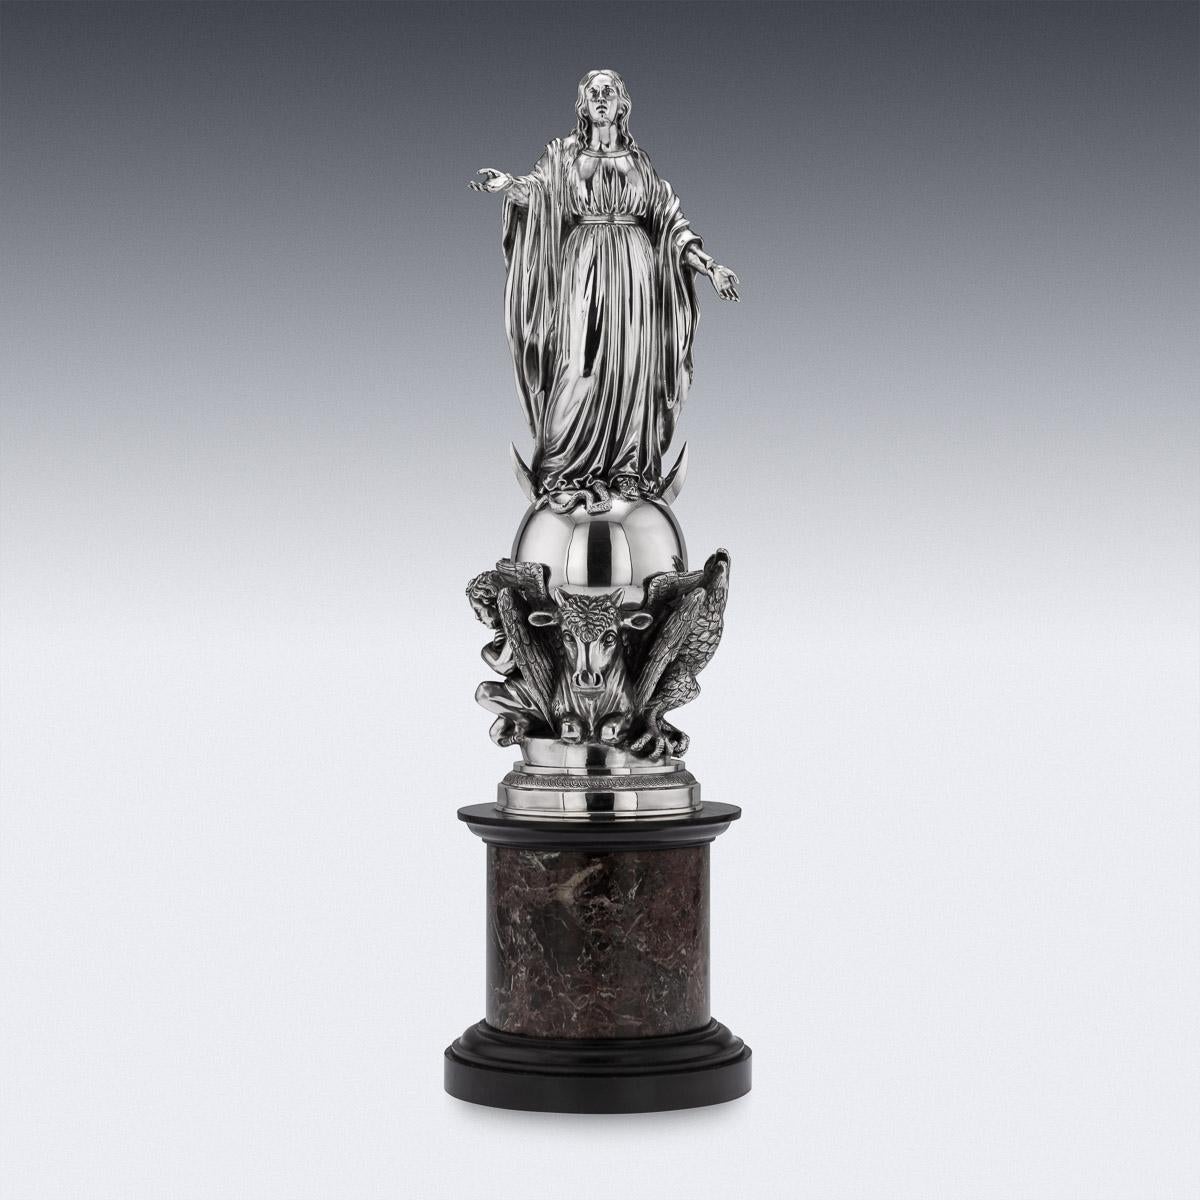 Antique 19th century French monumental solid silver statue, standing on a marble base, the statue realistically modelled as a cast figure of Mary with hands open, standing on a serpent, influenced by the painting 'The Immaculate Conception', by the